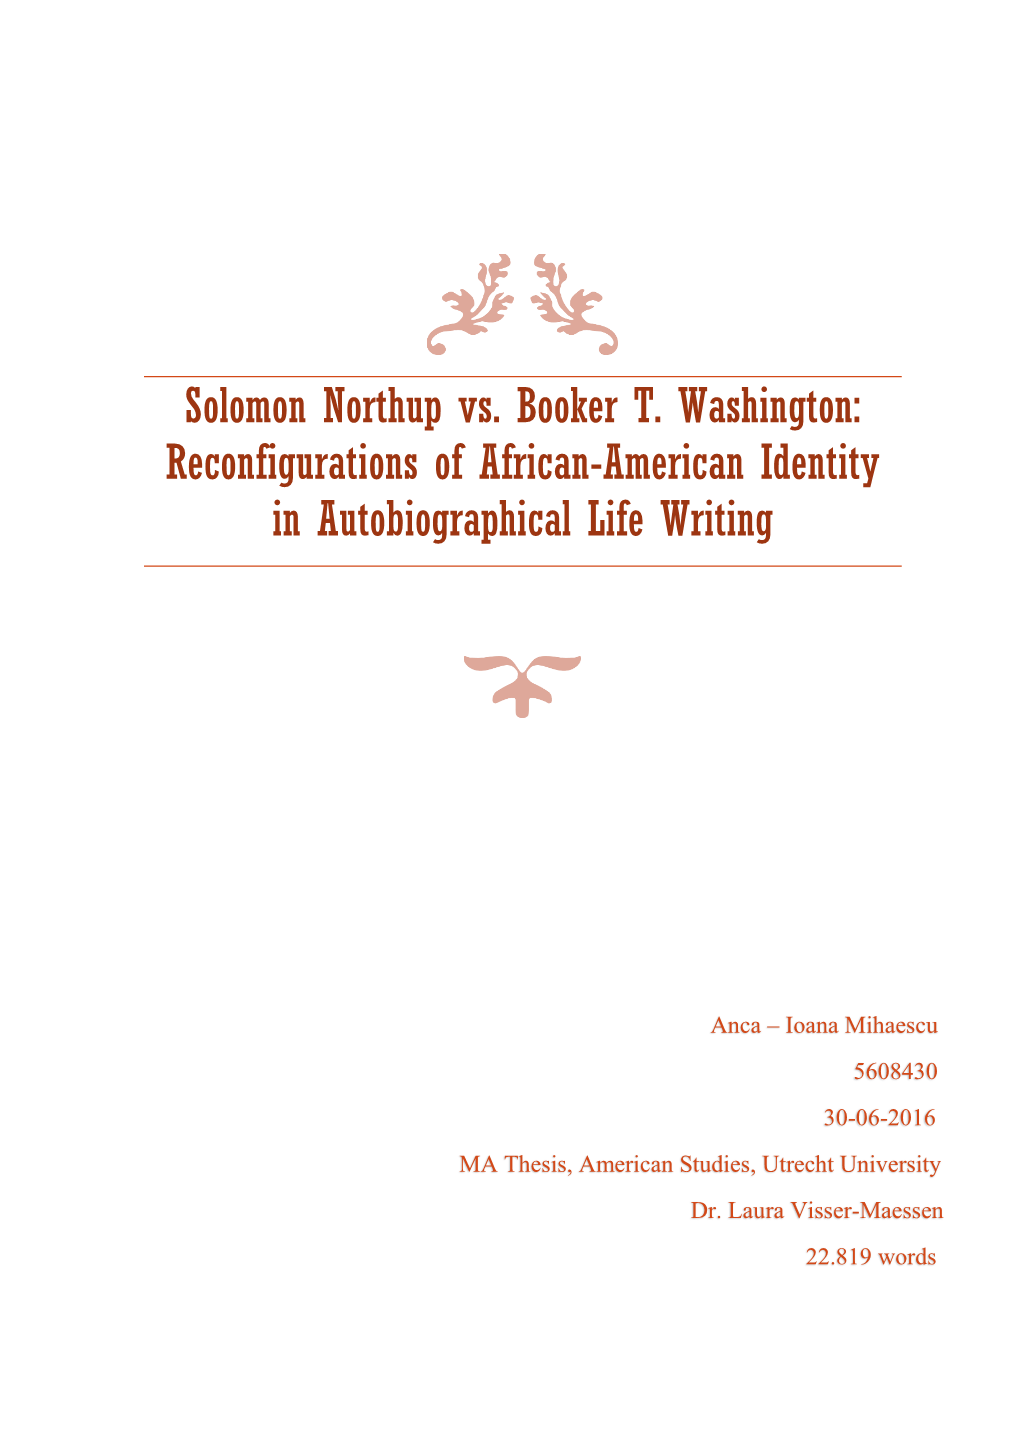 Solomon Northup Vs. Booker T. Washington: Reconfigurations of African-American Identity in Autobiographical Life Writing